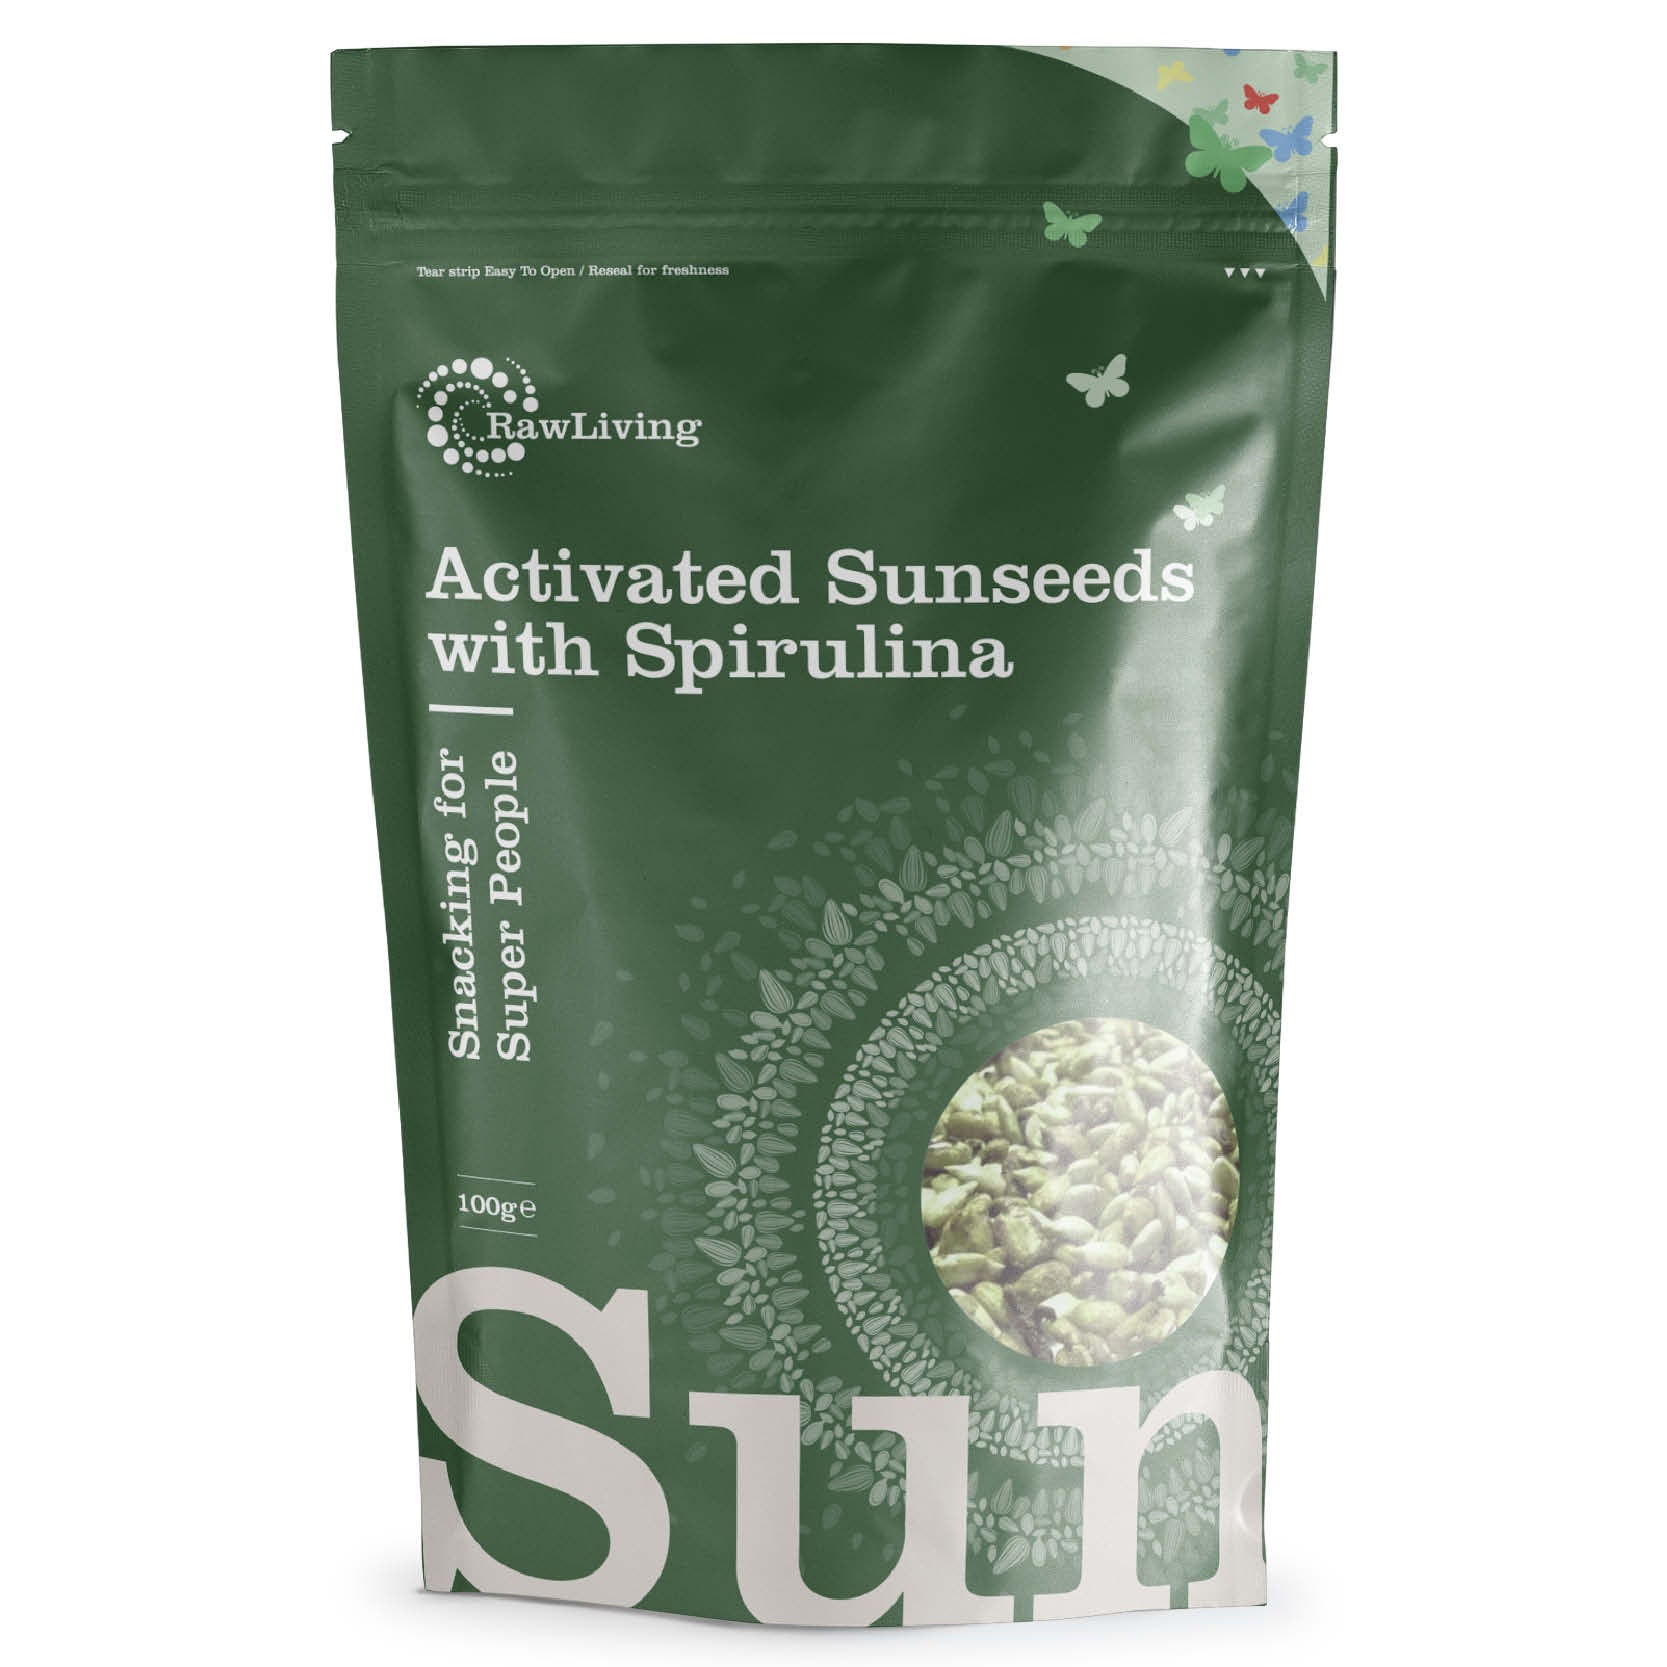 Activated Sunseeds with Spirulina | Raw Living UK | Raw Foods | Nuts & Seeds | Super Foods | Raw Living Activated Sunseeds with Spirulina: our Sunseeds are a Raw, Dairy-Free, Sugar-Free Snack. Sunflower & Pumpkin Seeds marinaded with Spirulina & Spices.